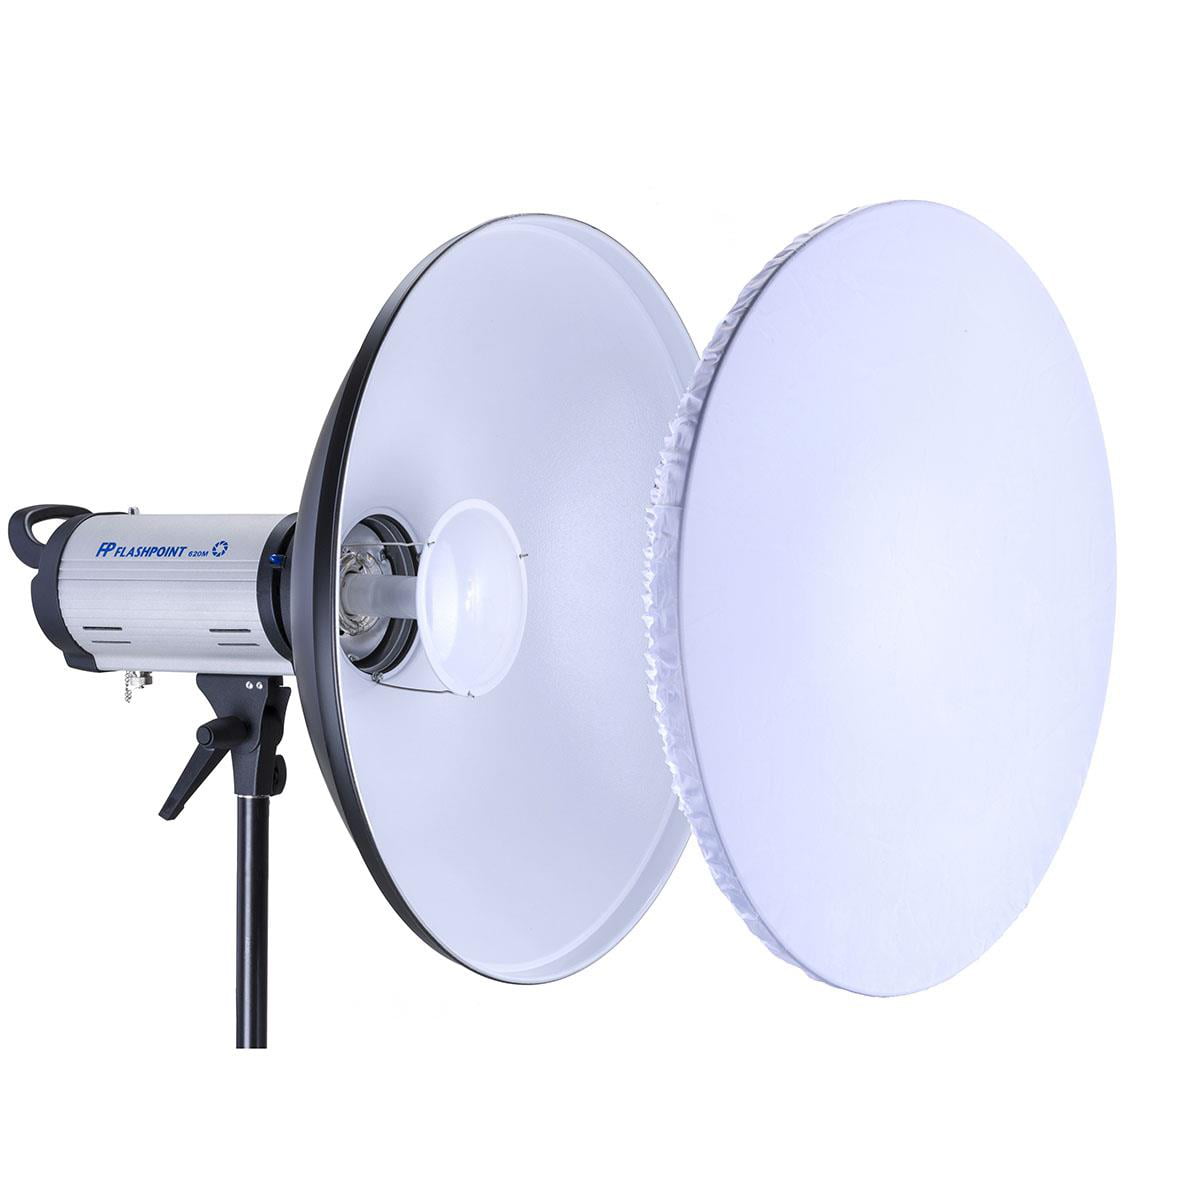 Glow 17 White Beauty Dish for Flashpoint Mount 